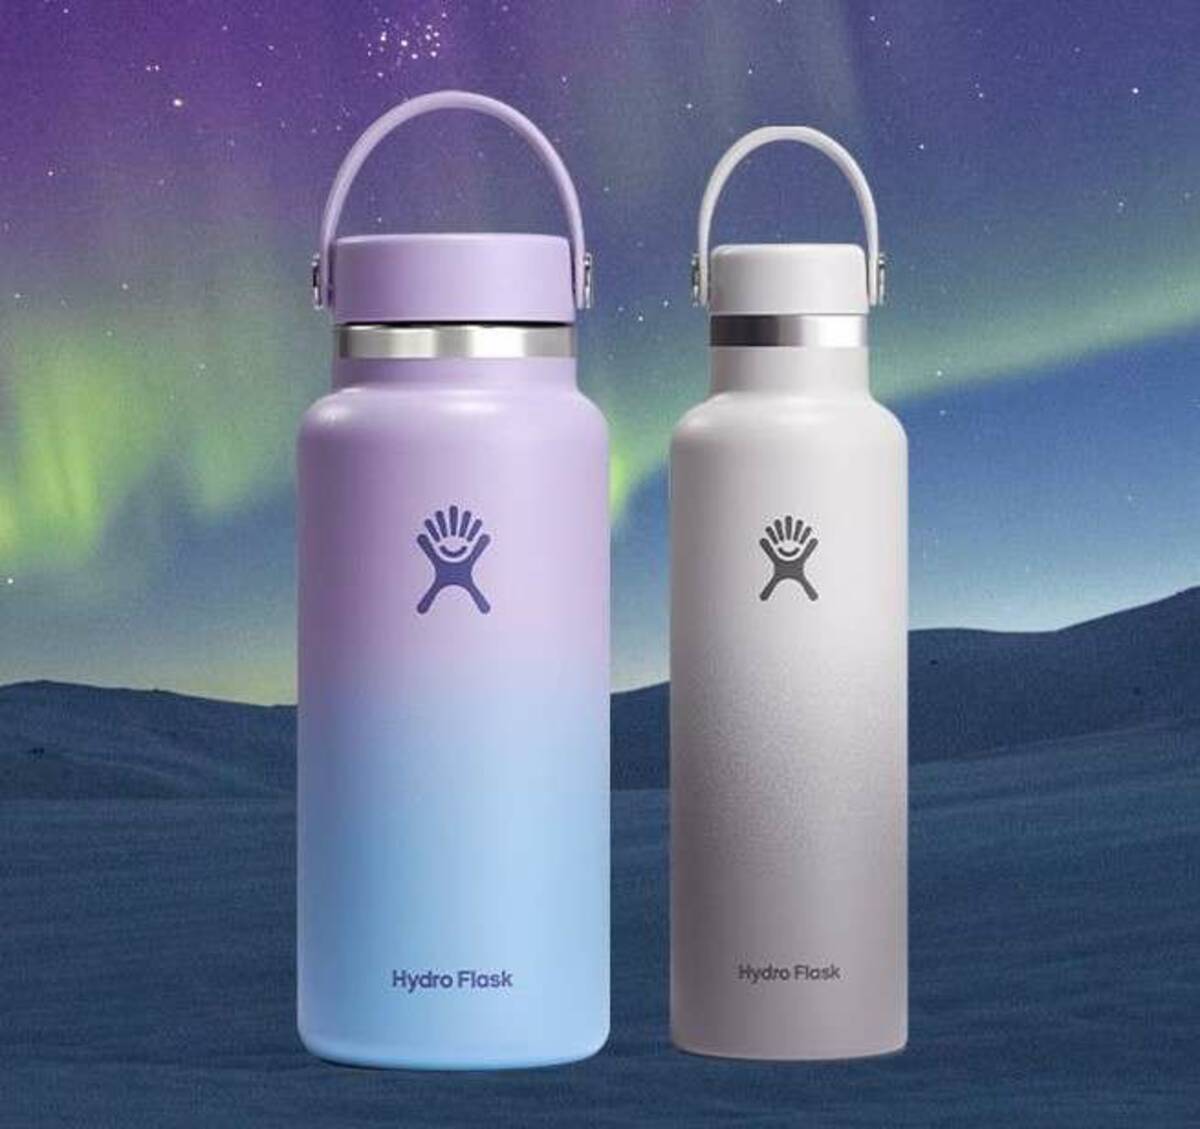 Hydro Flask Launches New Polar Ombre Collection